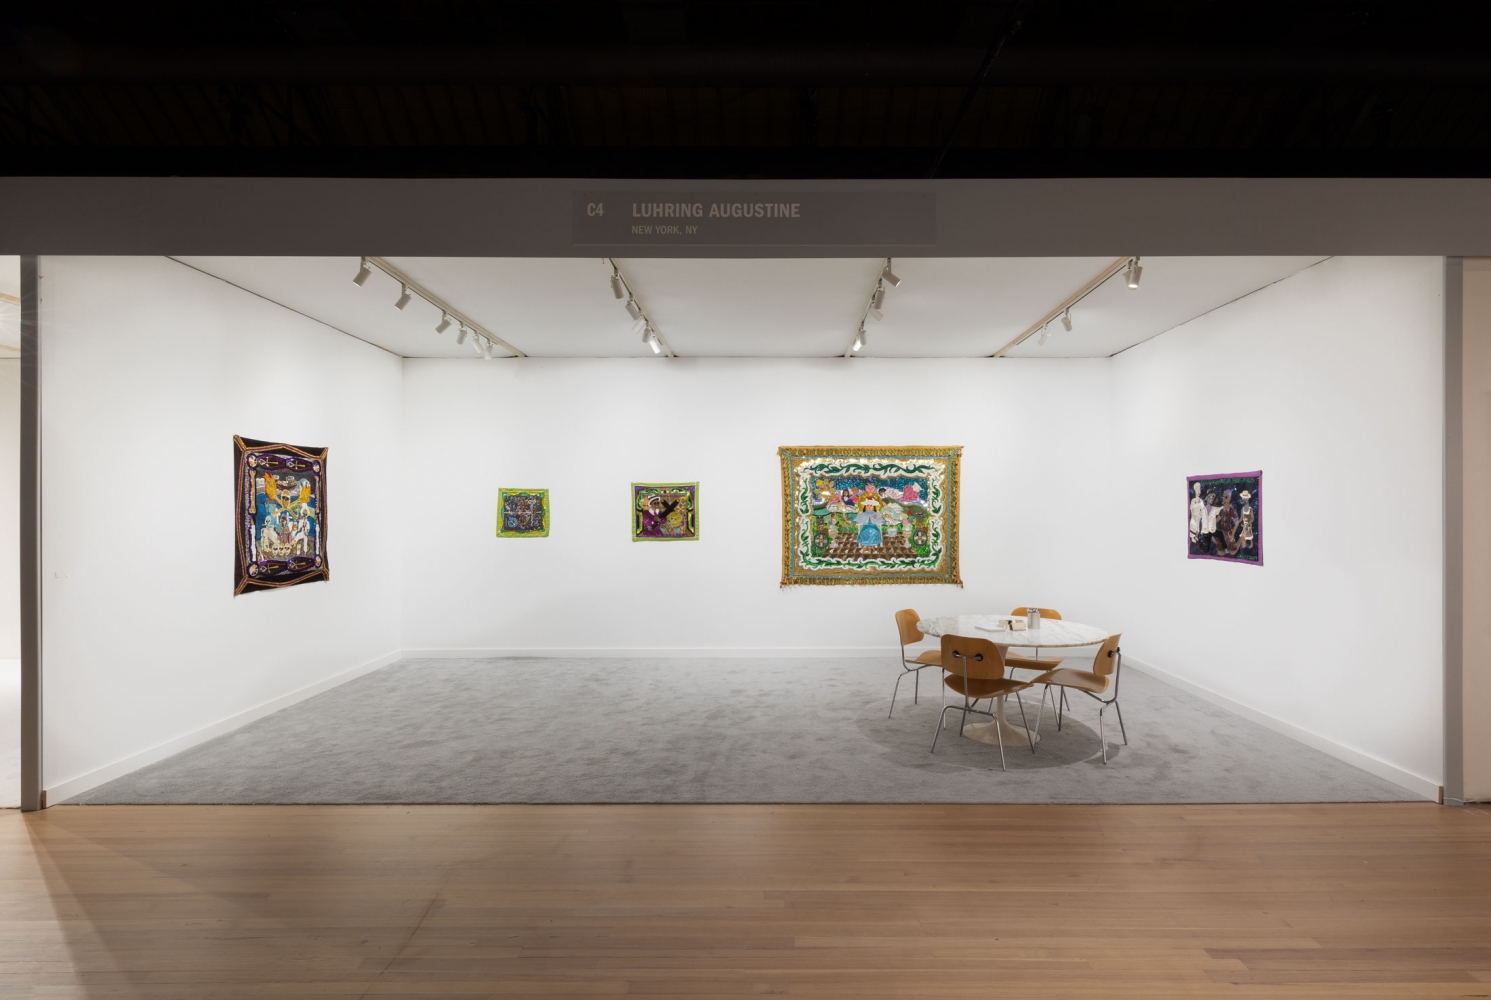 Luhring Augustine
ADAA | The Art Show, Booth C4
Installation view
2021
Photo: Dawn Blackman